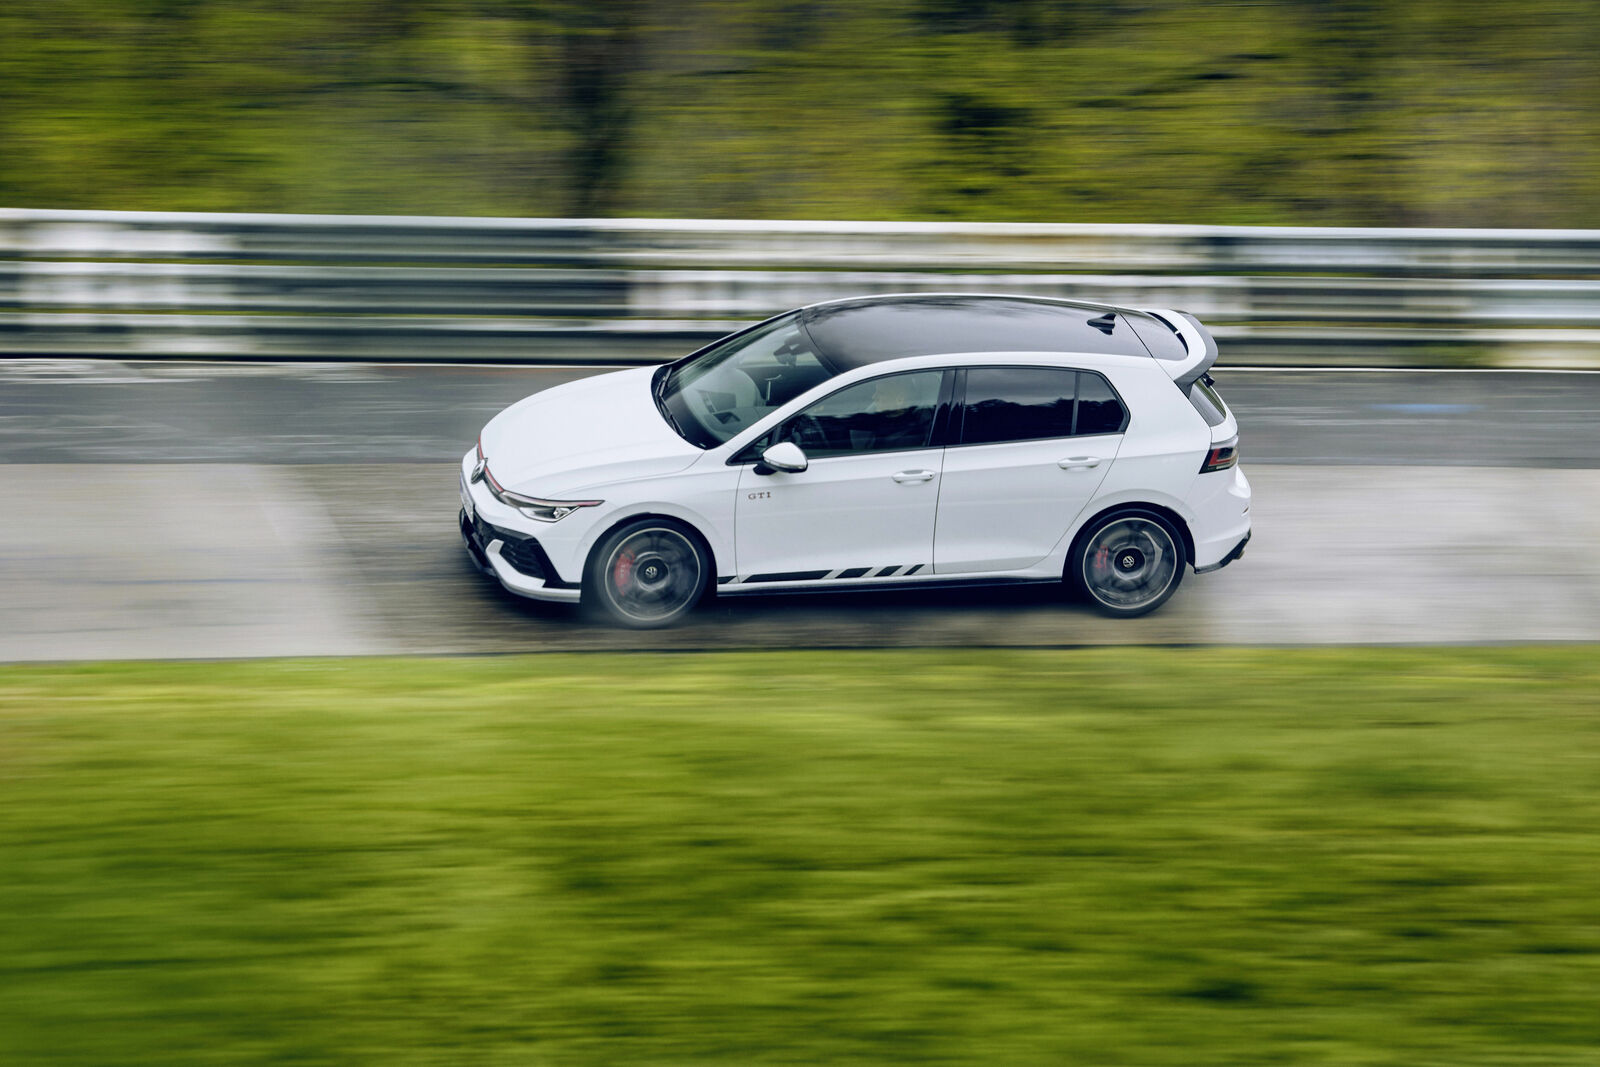 The new Golf GTI Clubsport made an exciting debut at the Nürburgring 24-Hour Race, impressing fans with its sharper design, enhanced performance, and cutting-edge features.